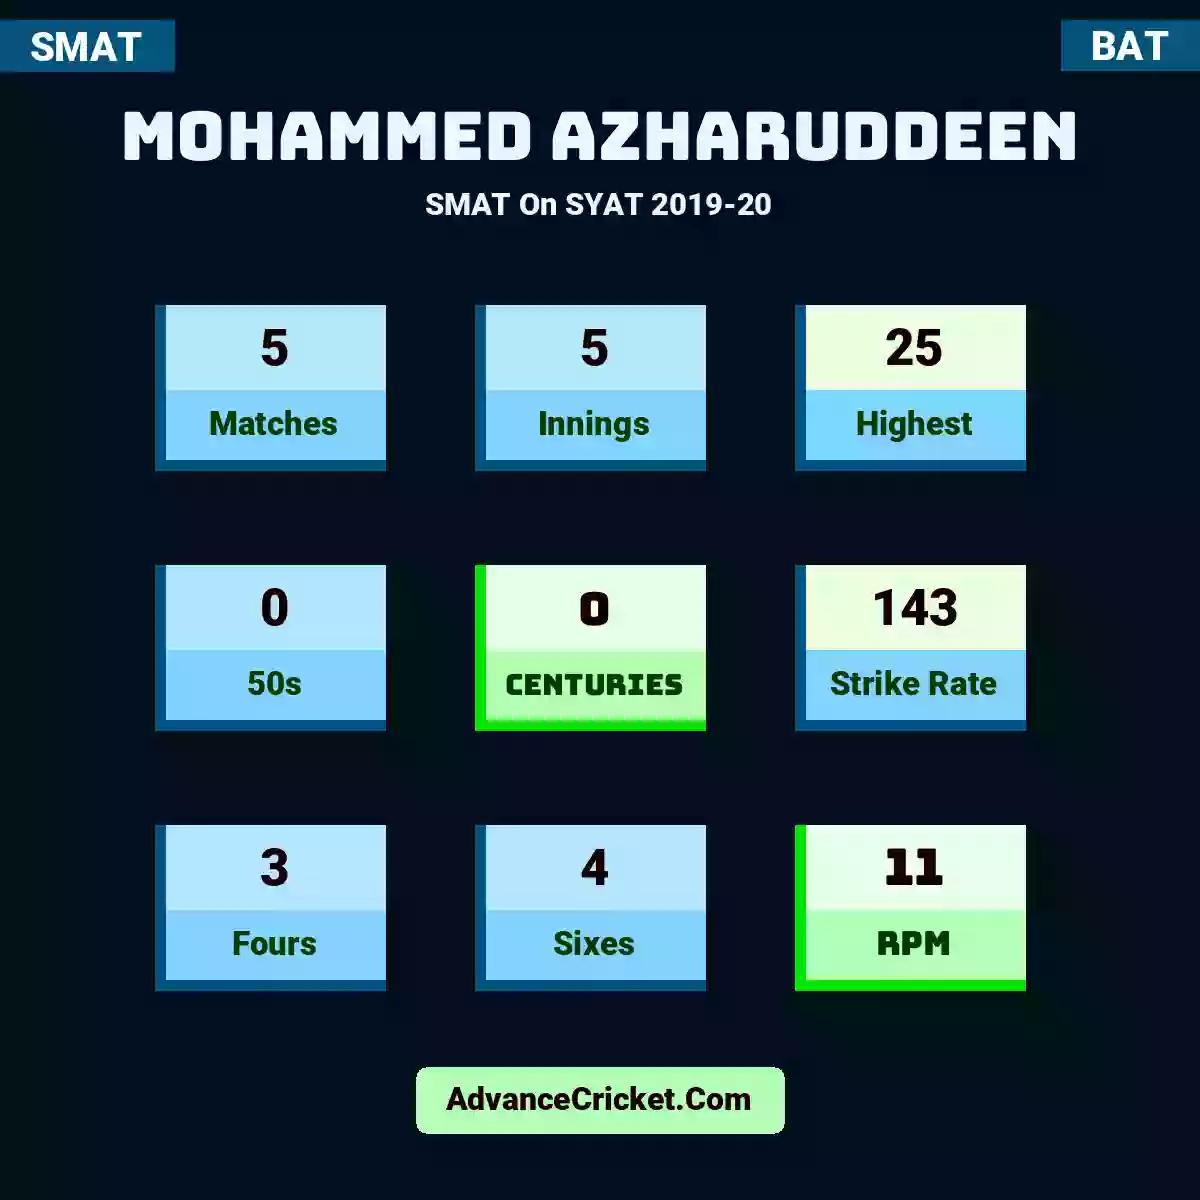 Mohammed Azharuddeen SMAT  On SYAT 2019-20, Mohammed Azharuddeen played 5 matches, scored 25 runs as highest, 0 half-centuries, and 0 centuries, with a strike rate of 143. M.Azharuddeen hit 3 fours and 4 sixes, with an RPM of 11.